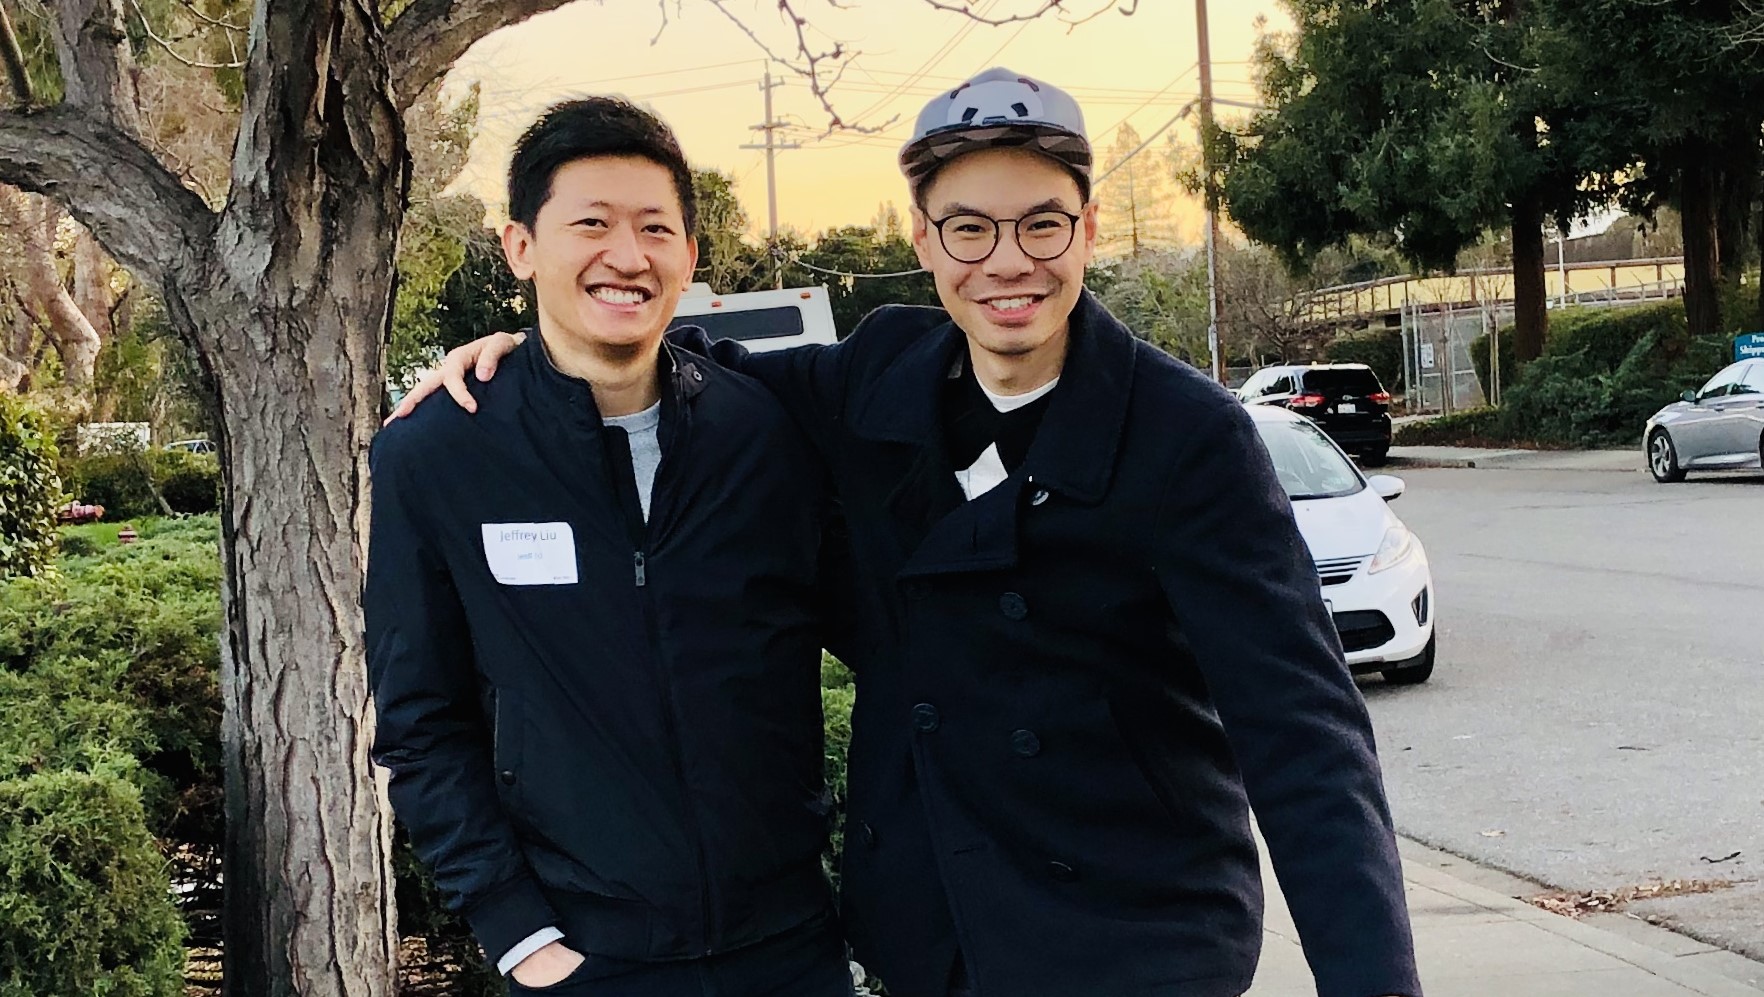 Jeffrey Liu and Justin Louie with Y-Combinator sign